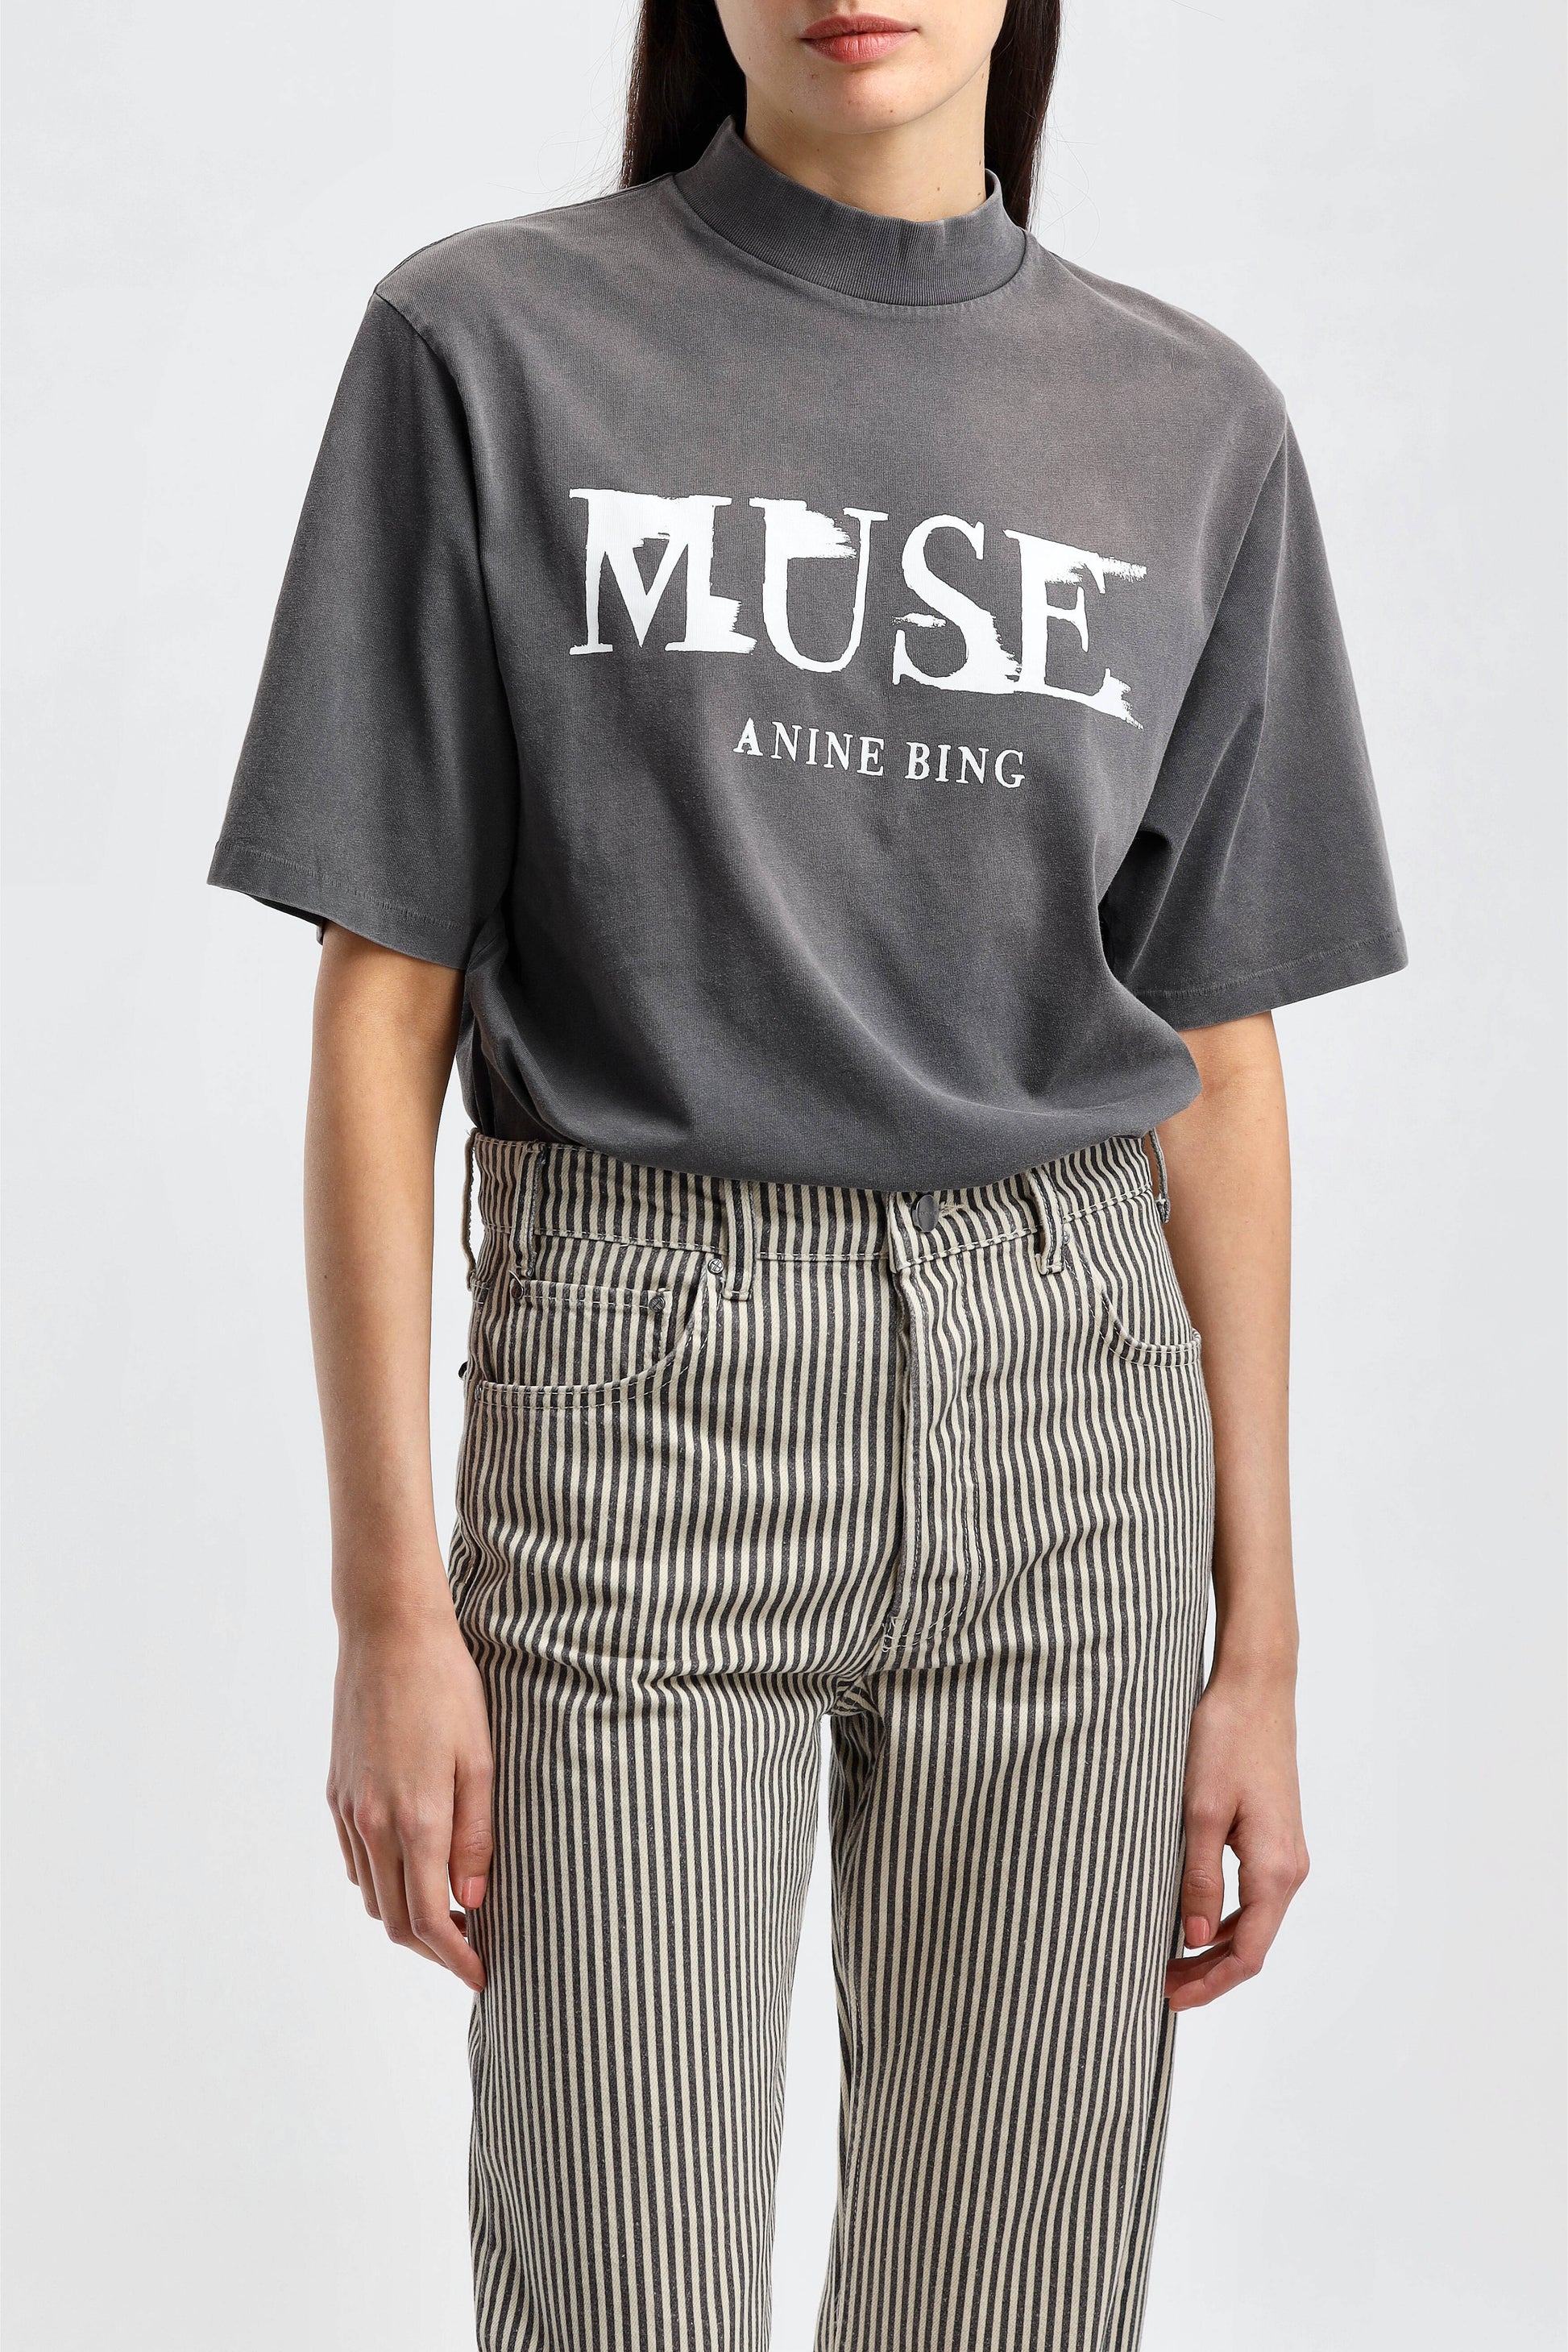 T-Shirt Wes Muse in Washed BlackAnine Bing - Anita Hass